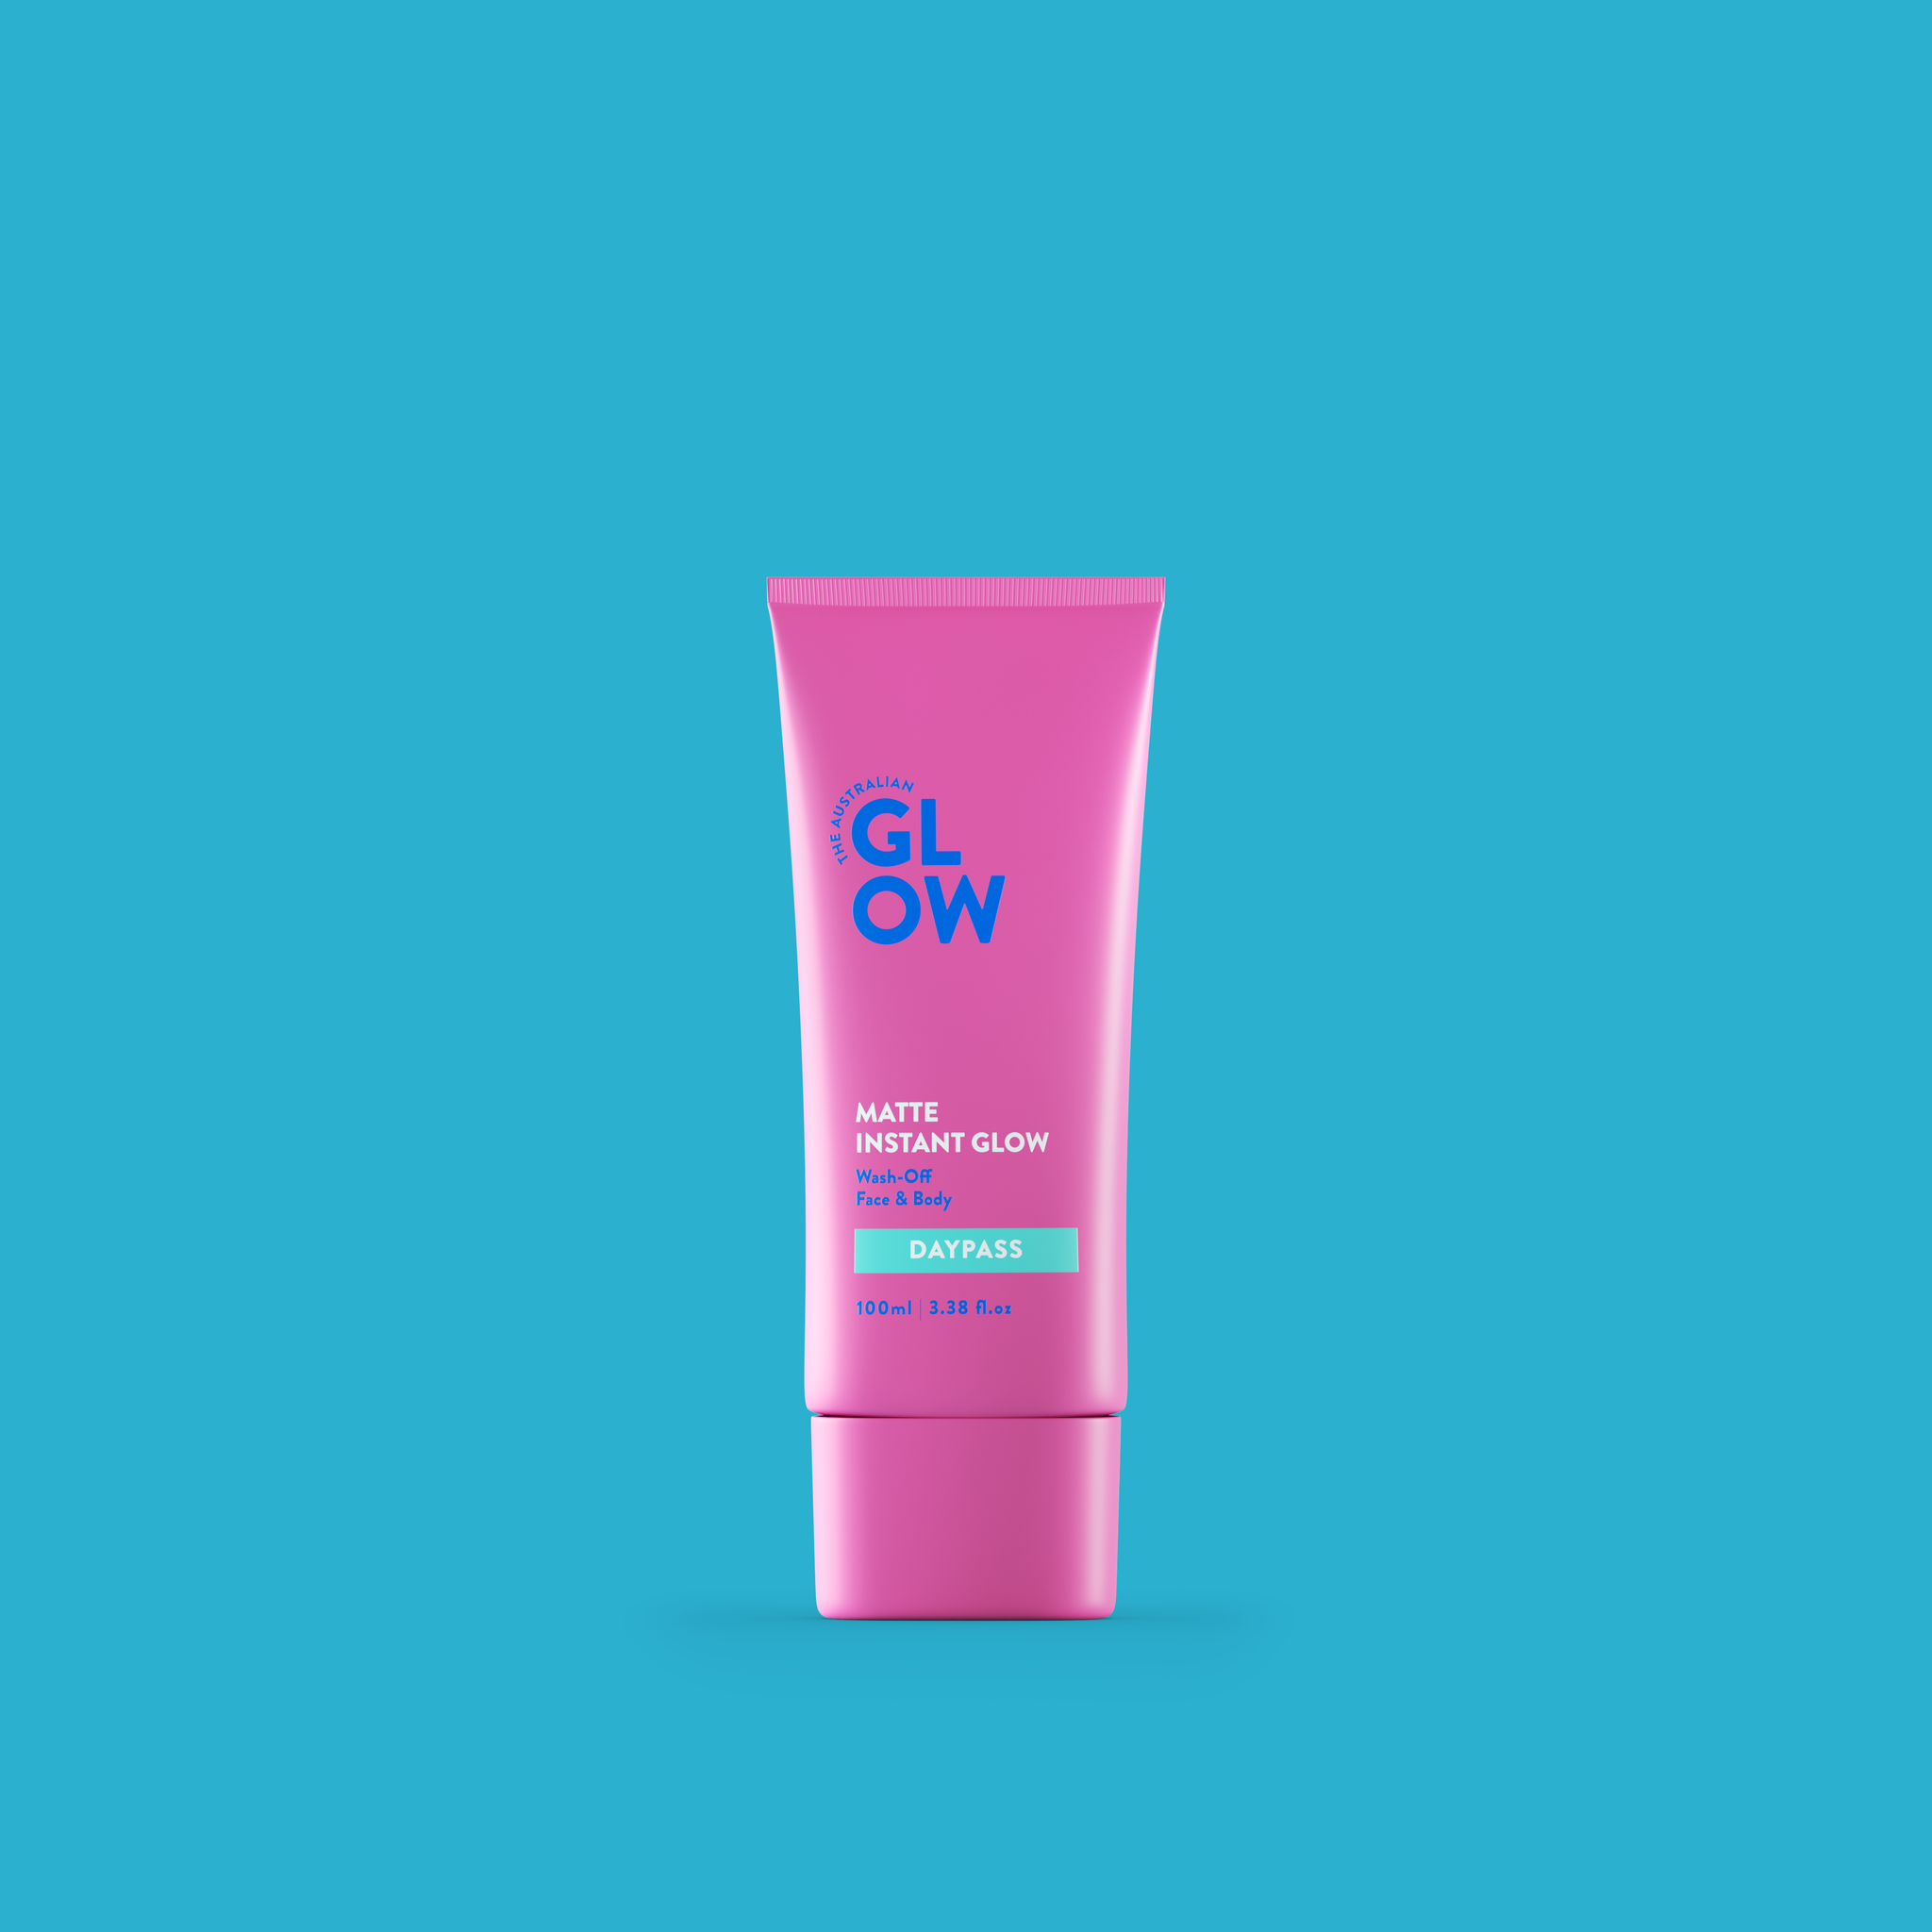 Instant Glow Matte "Day Pass" Wash Off Face & Body